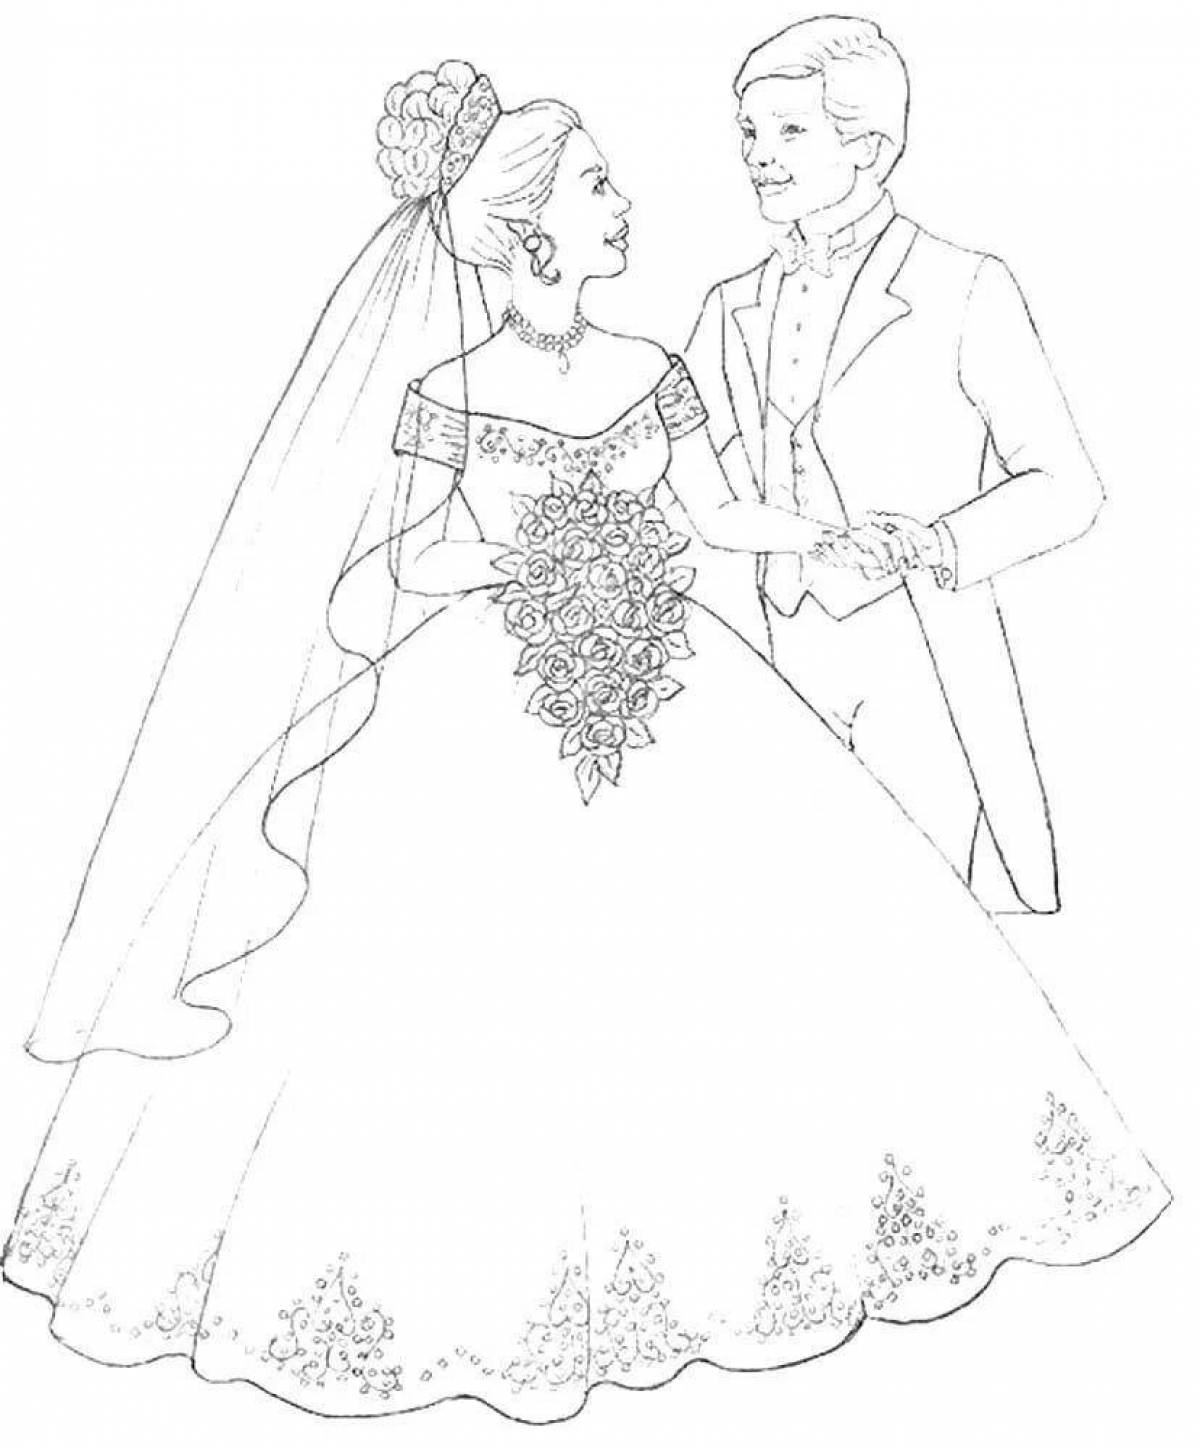 Delightful wedding coloring book for kids